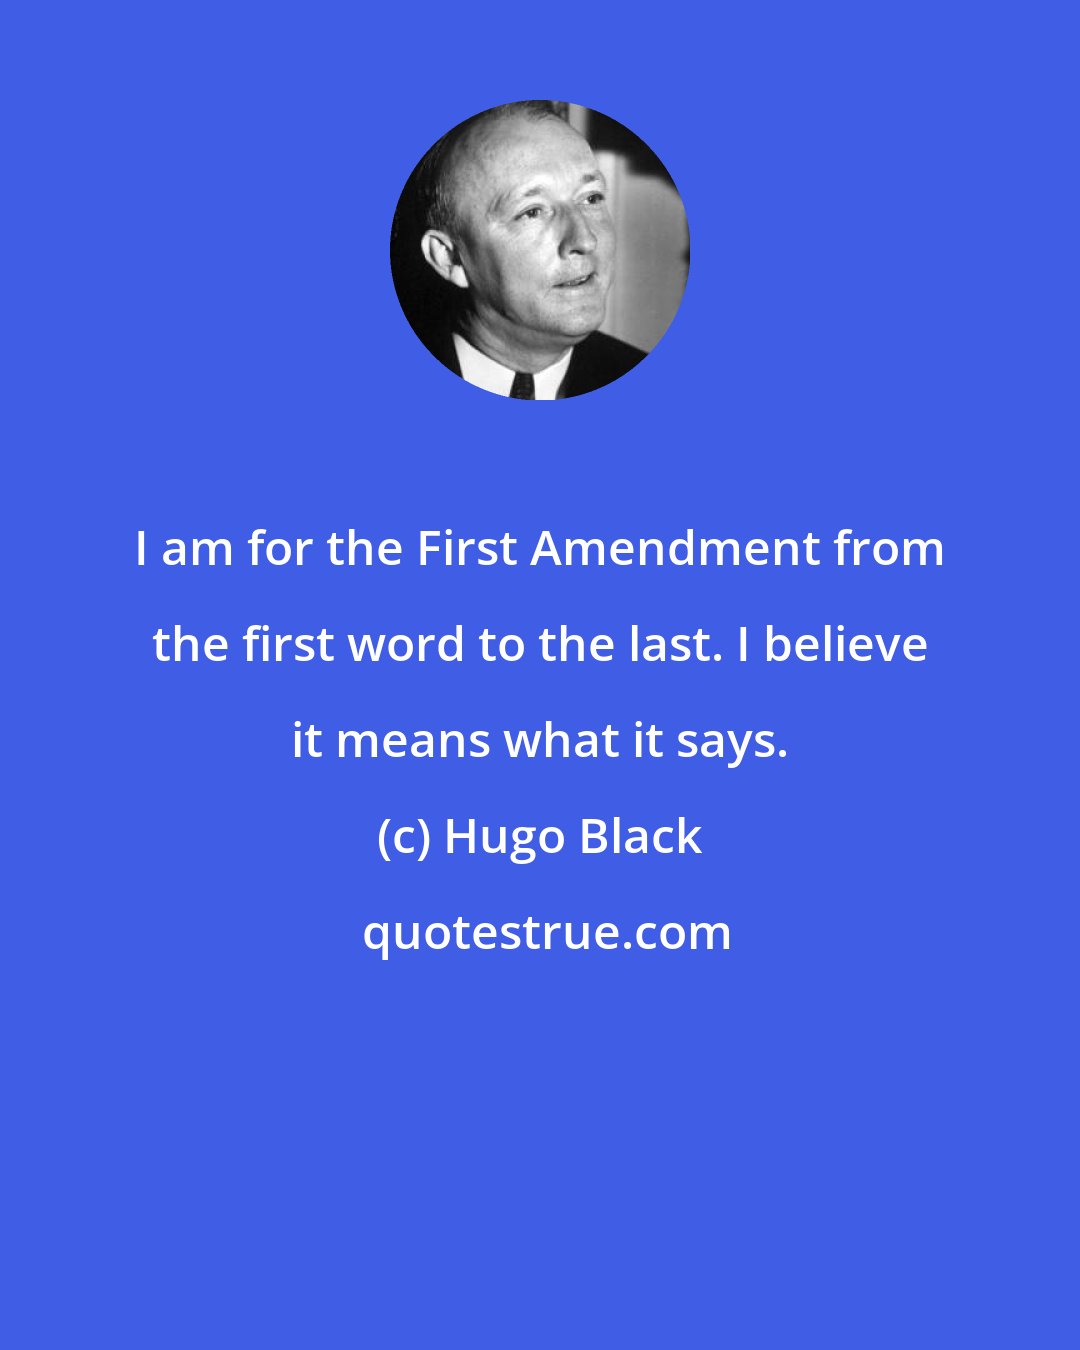 Hugo Black: I am for the First Amendment from the first word to the last. I believe it means what it says.